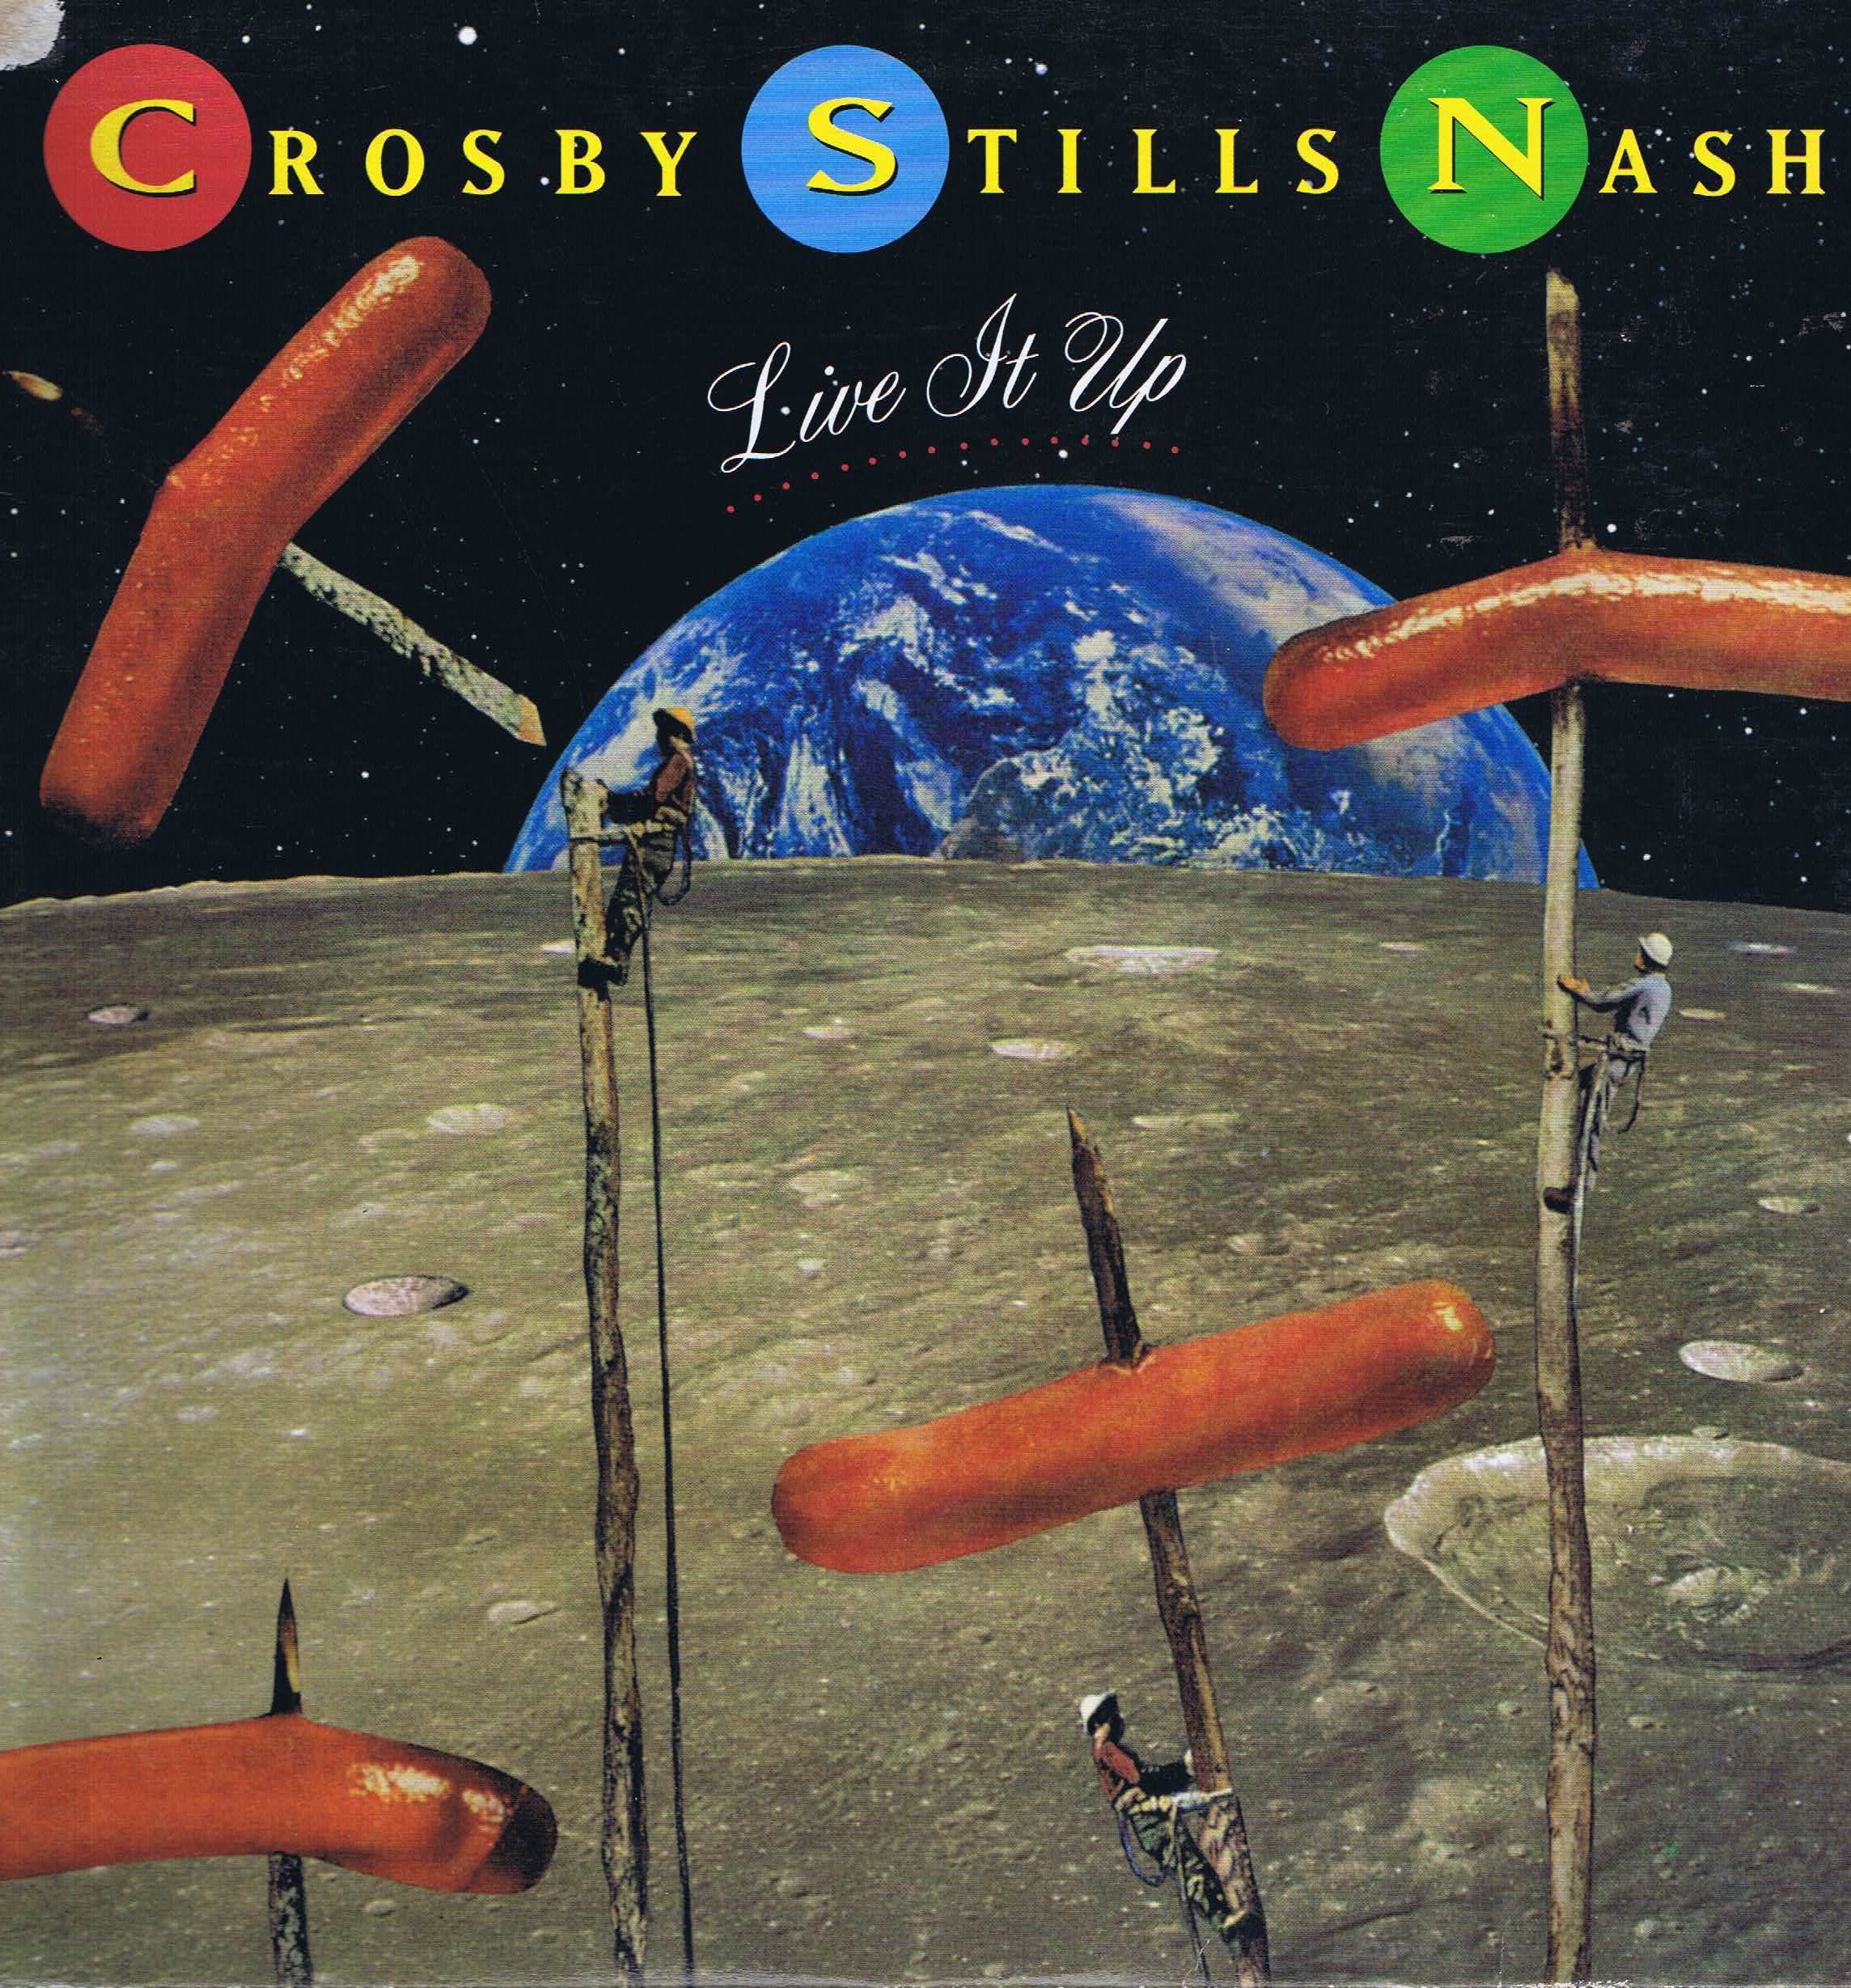 Album artwork for 'Live It Up' by Crosby, Stills, and Nash